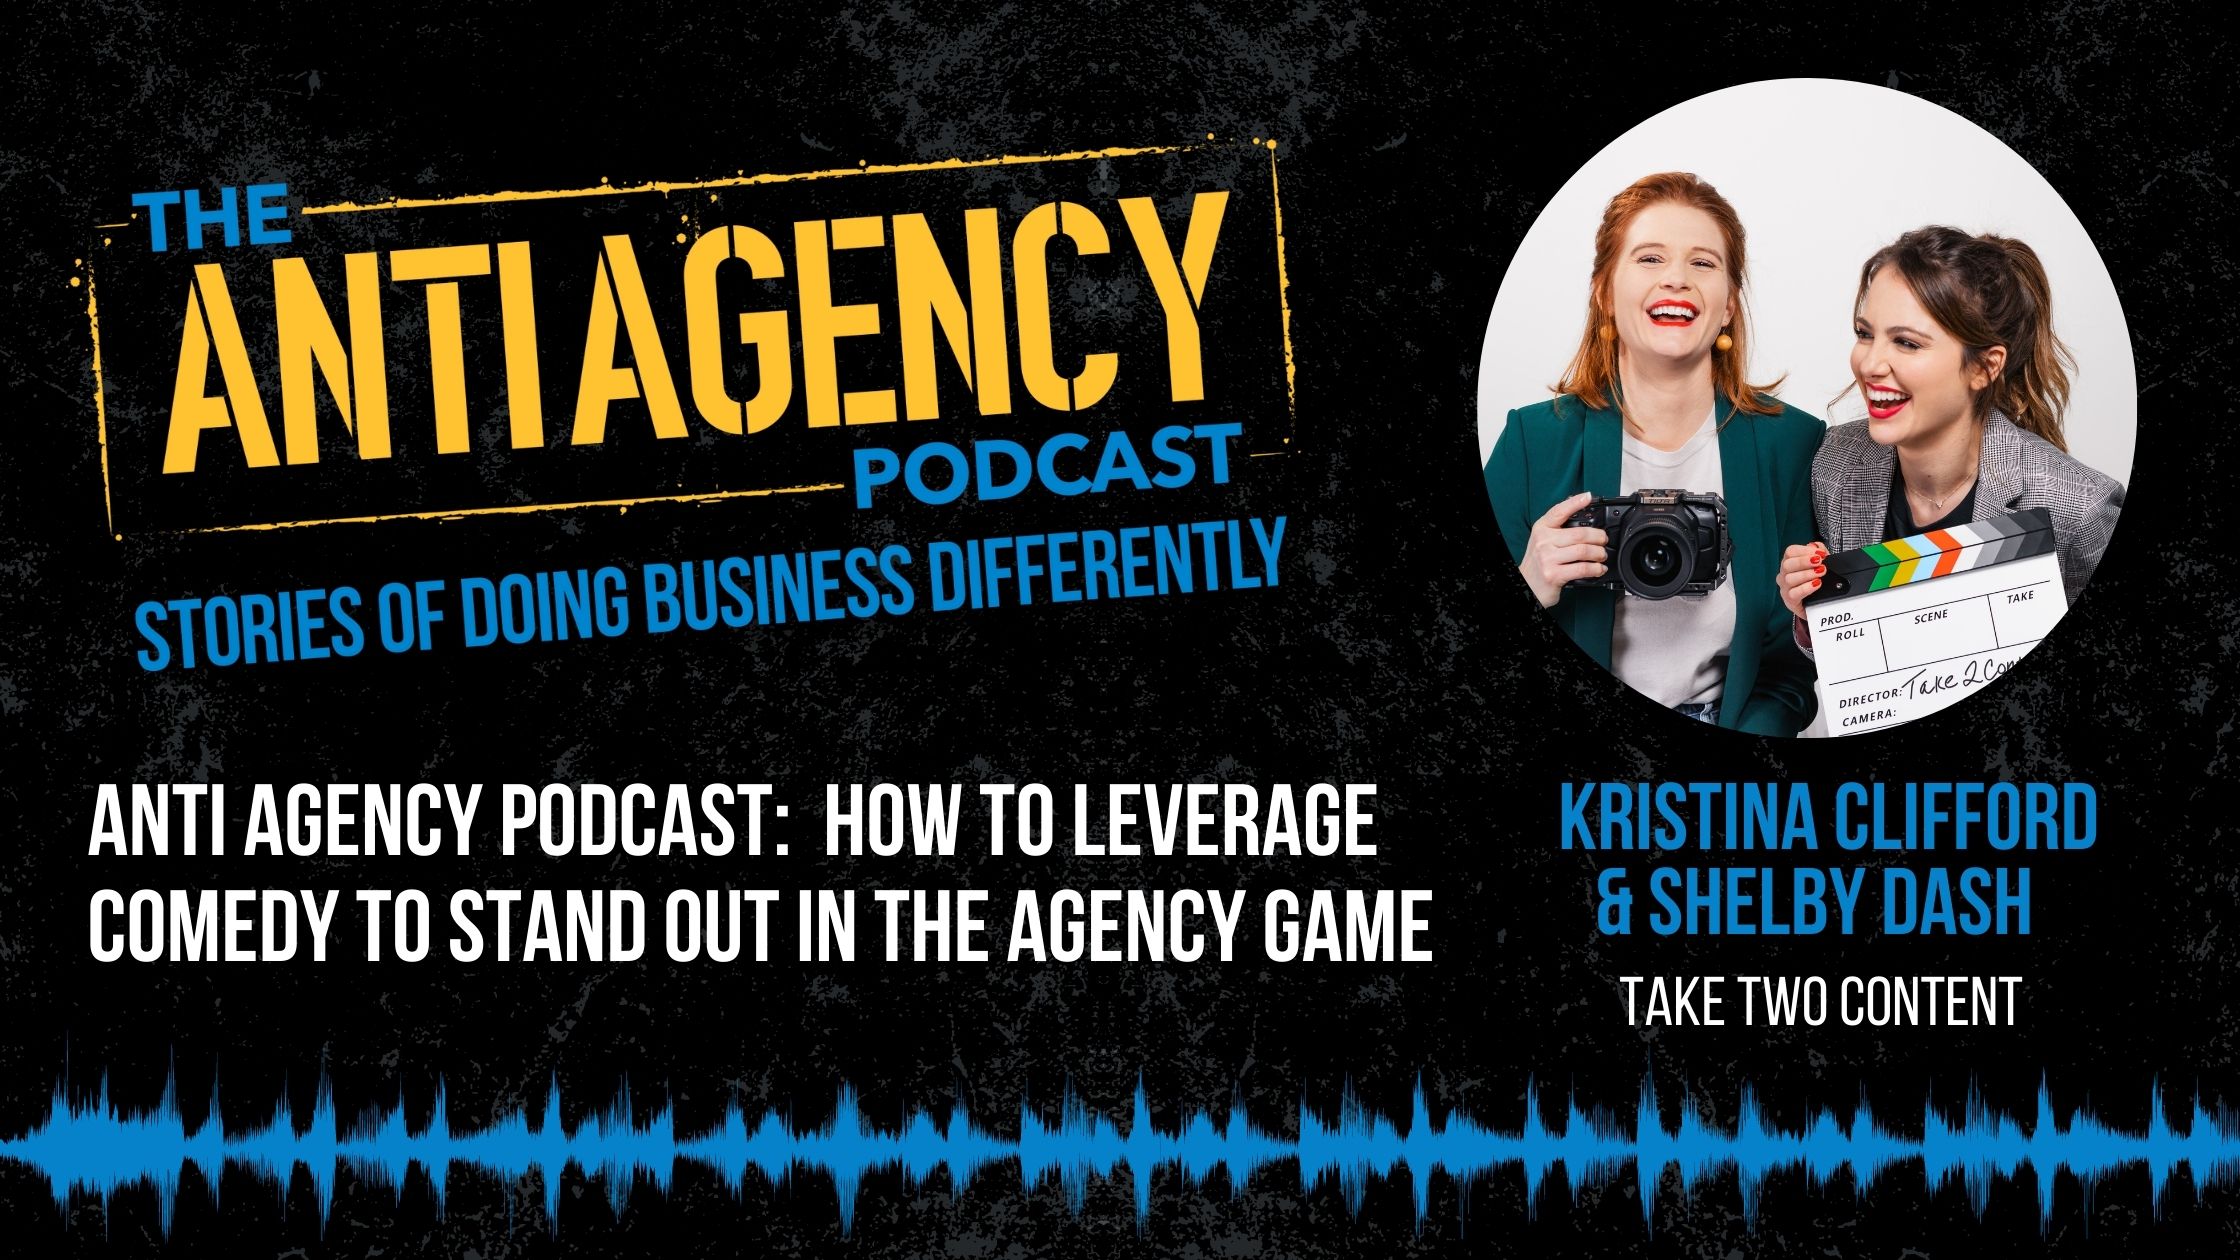 Anti Agency Podcast: How to Leverage Comedy to Stand Out in The Agency Game